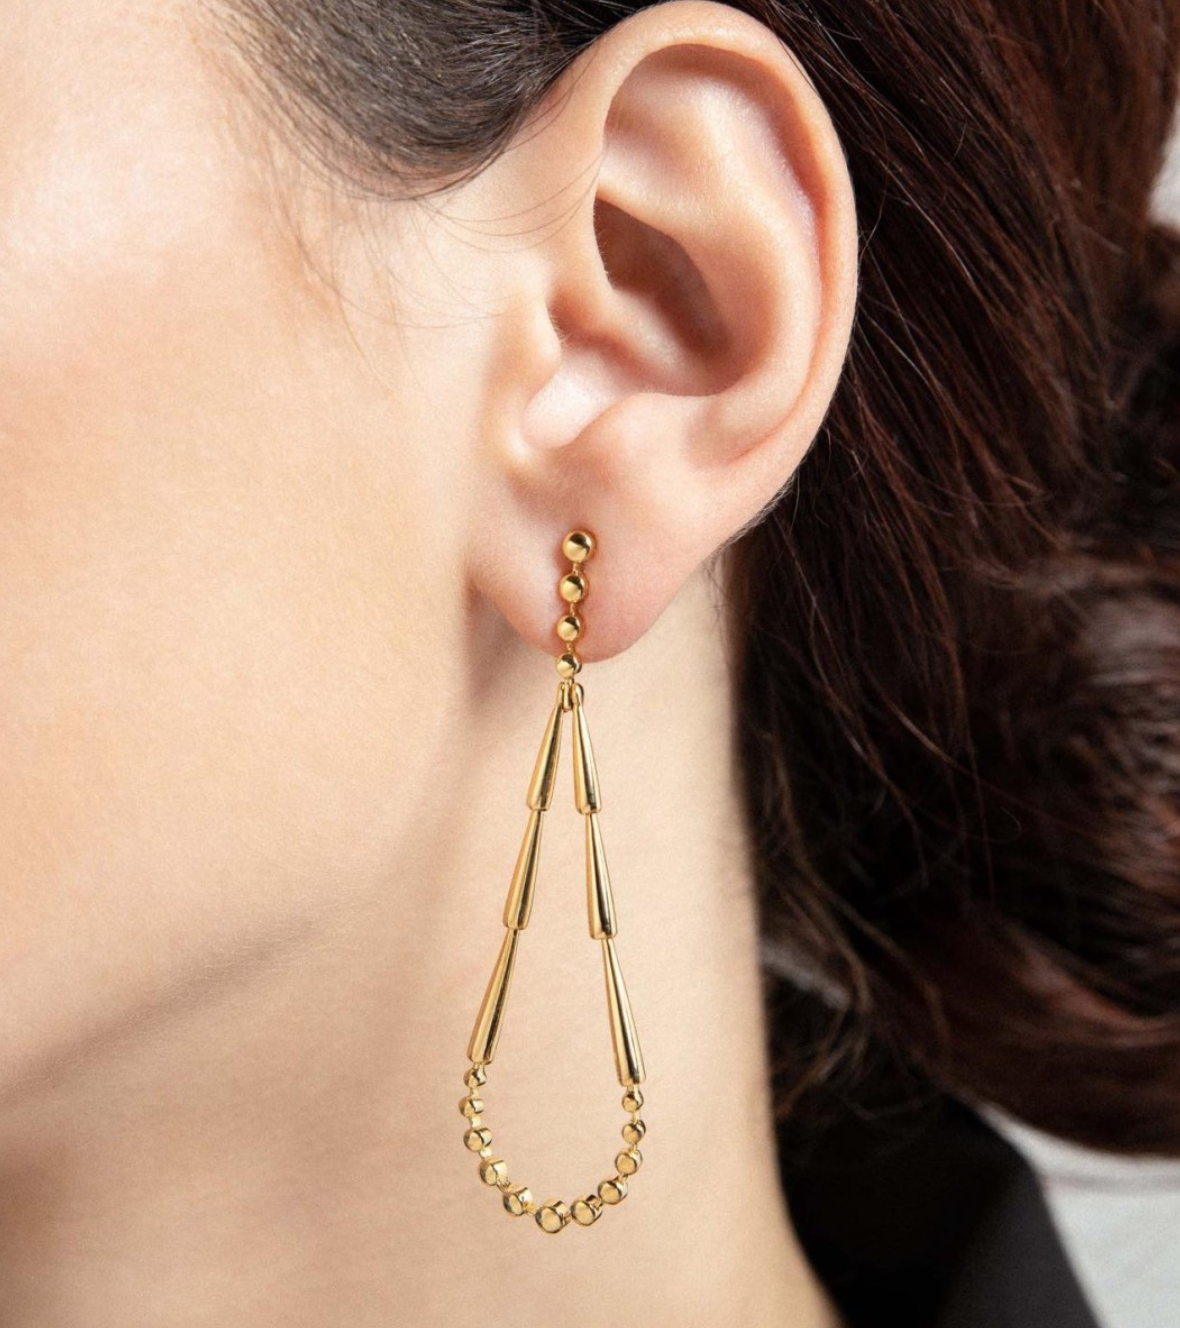 Yellow Gold Earrings 03624 by Etho Maria